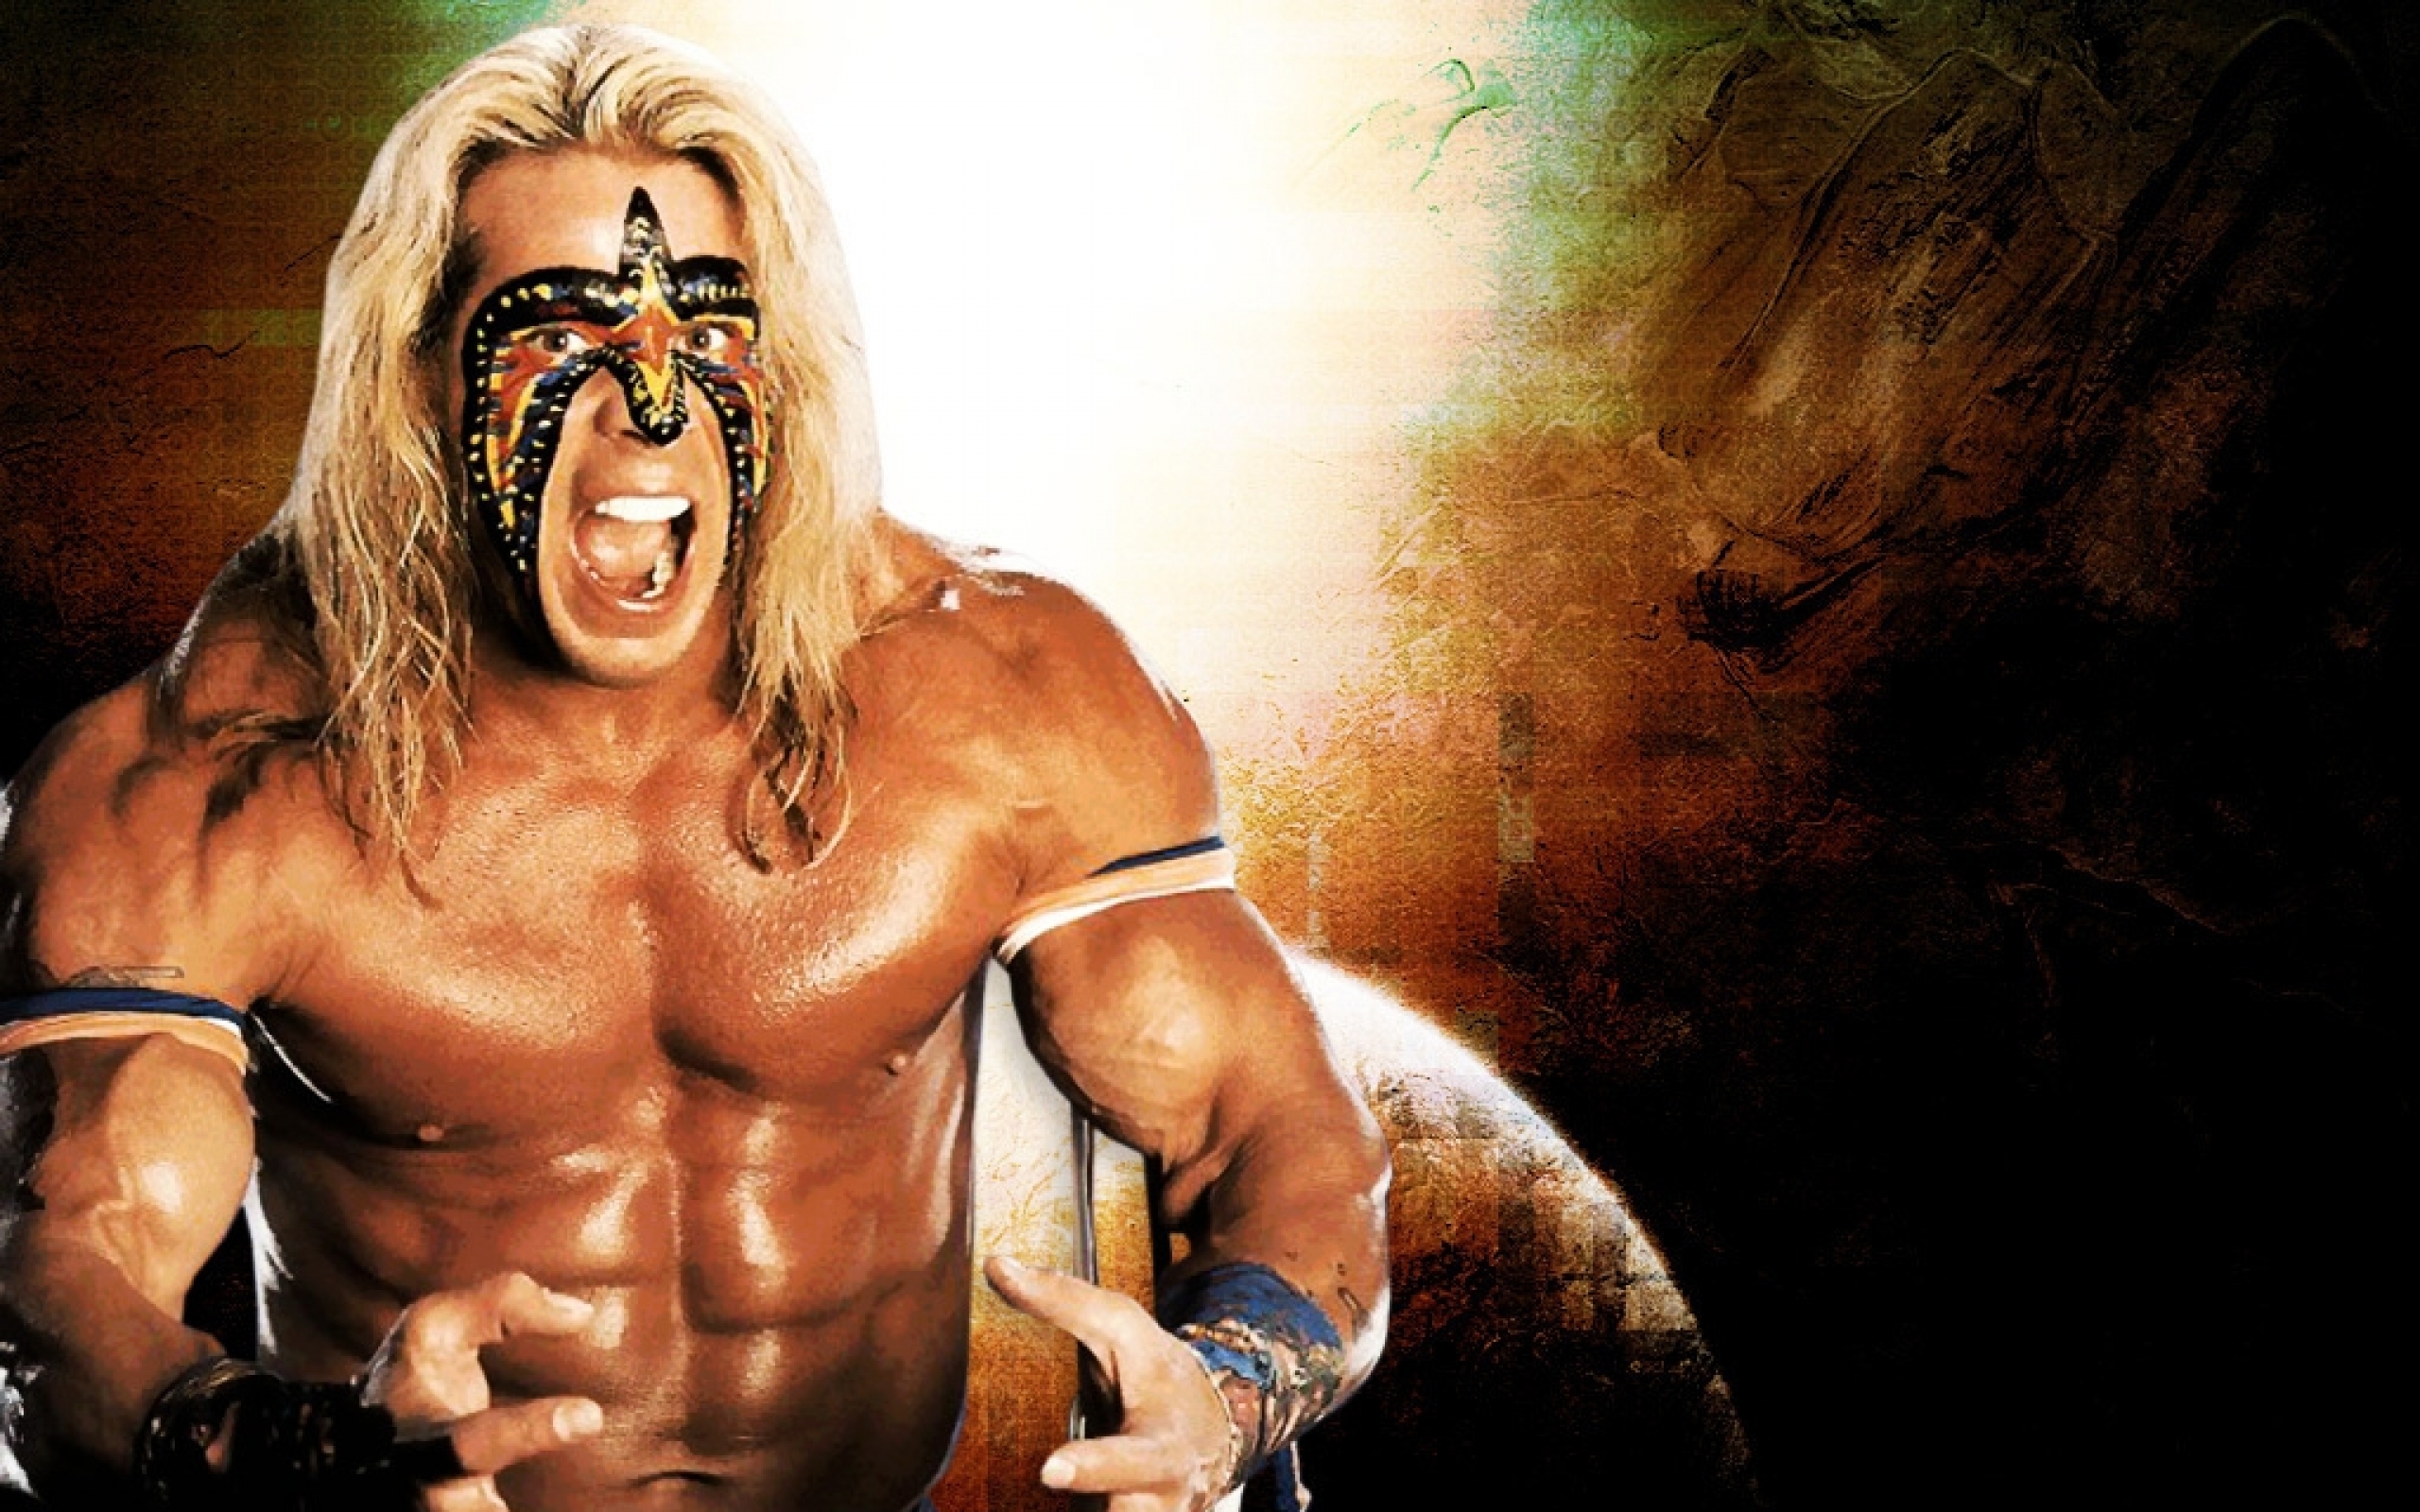 Download Wallpapers Download 2560x1600 ultimate warrior professional